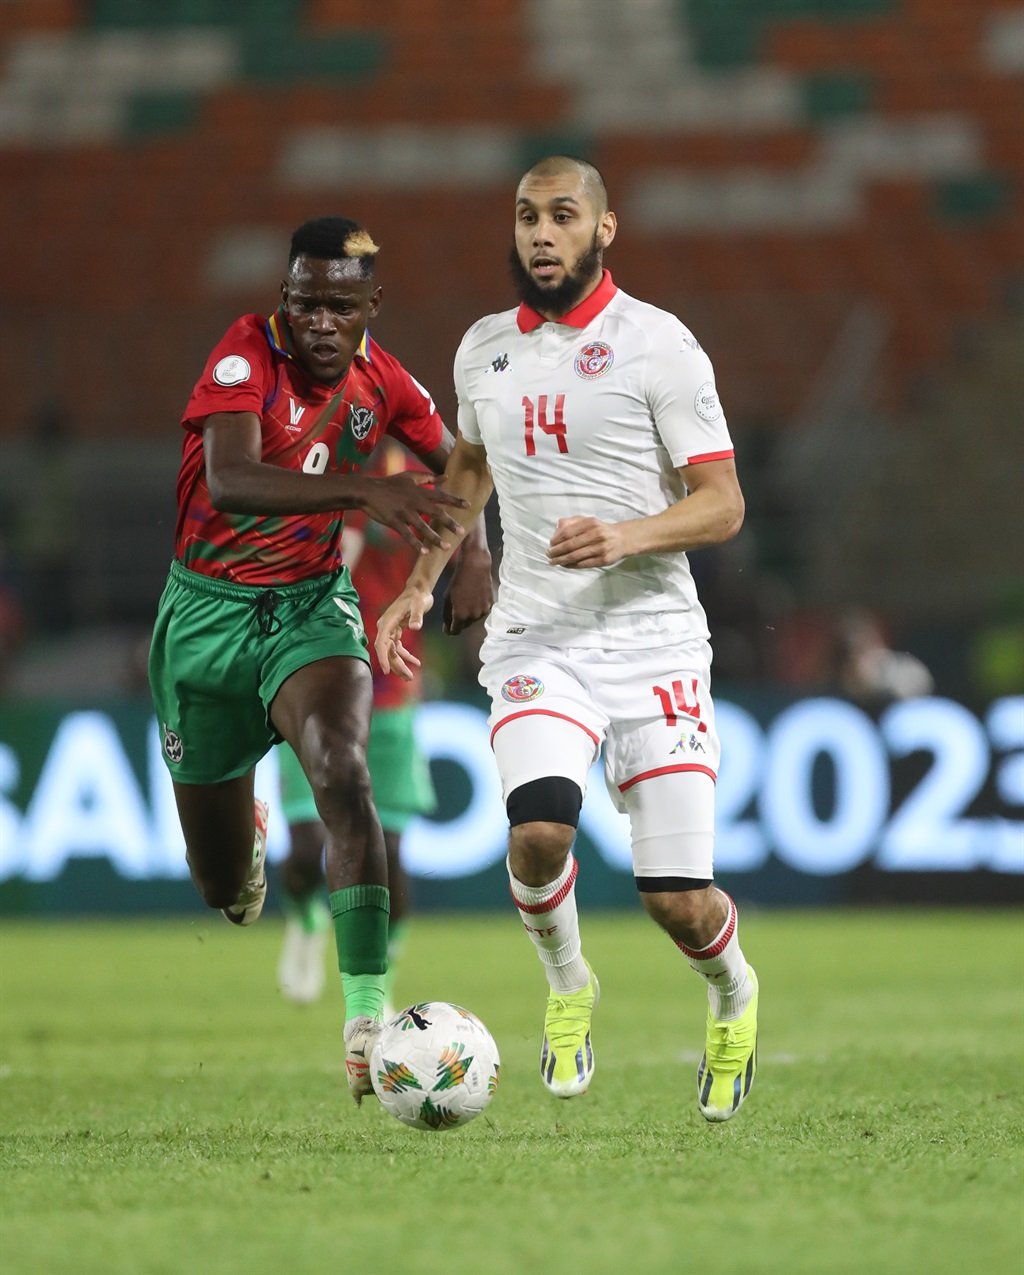 KORHOGO, IVORY COAST - JANUARY 16: Aissa LaÃ¯douni of Tunisia battles with Bethuel Muzeu of Namibia during the TotalEnergies CAF Africa Cup of Nations group stage match between Tunisia and Namibia at Amadou Gon Coulibaly Stadium on January 16, 2024 in Korhogo, Ivory Coast. (Photo by MB Media/Getty Images)